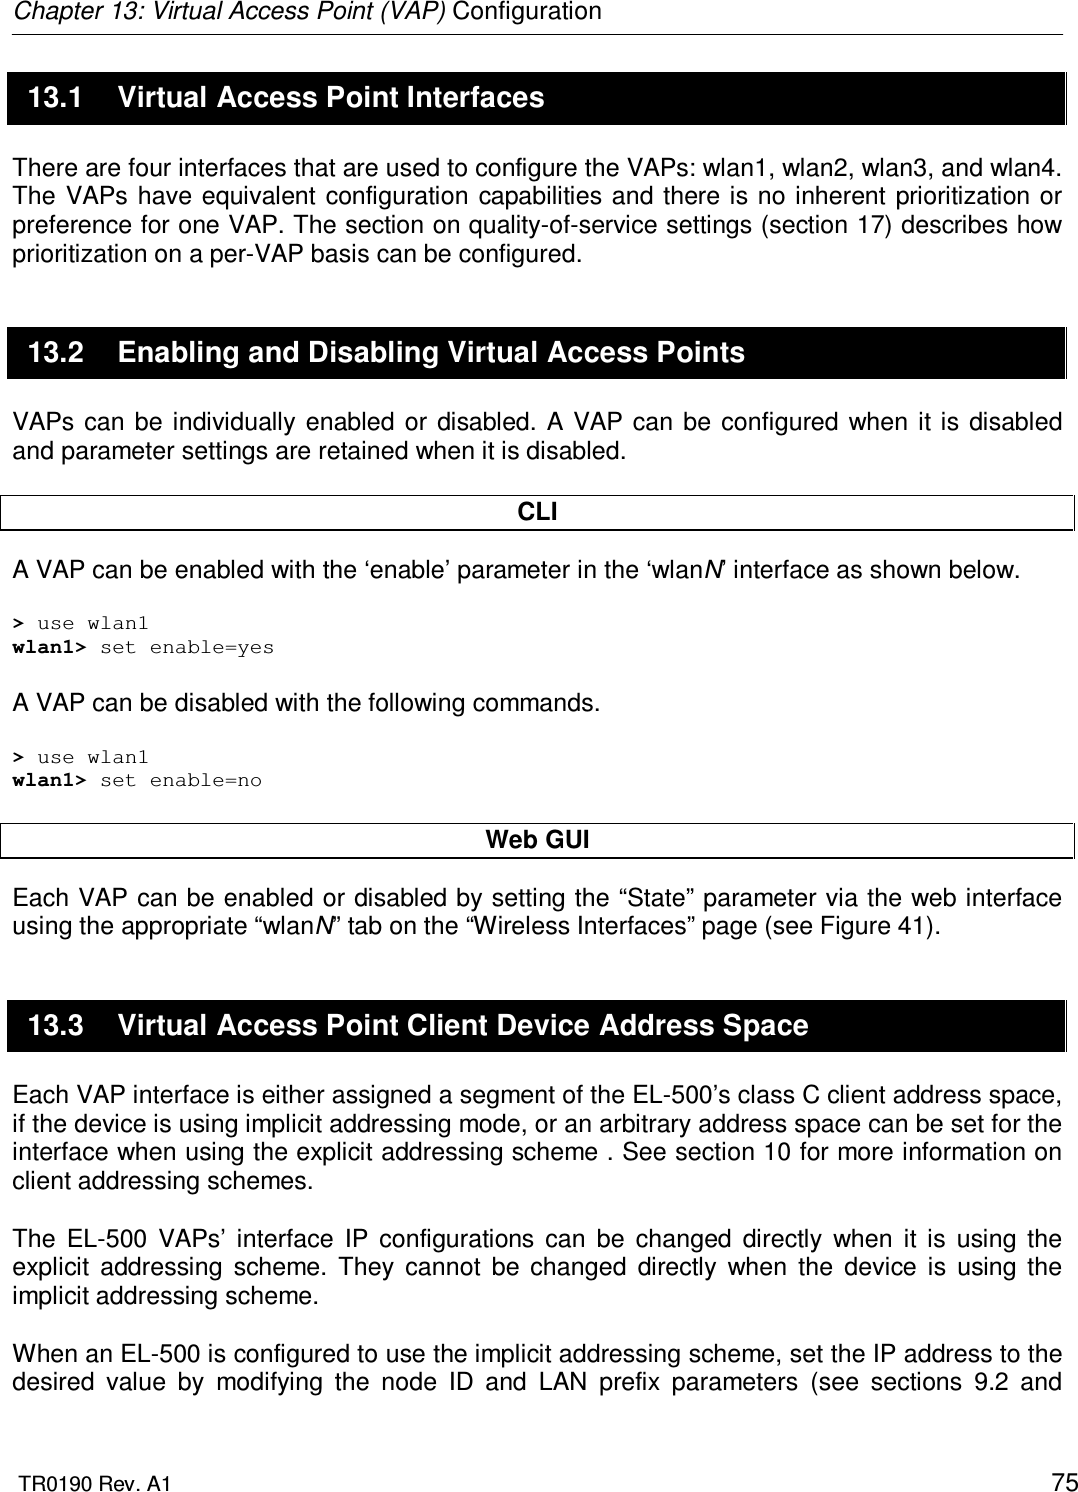 Chapter 13: Virtual Access Point (VAP) Configuration  TR0190 Rev. A1    75 13.1  Virtual Access Point Interfaces There are four interfaces that are used to configure the VAPs: wlan1, wlan2, wlan3, and wlan4. The  VAPs have equivalent configuration capabilities  and  there is  no inherent  prioritization or preference for one VAP. The section on quality-of-service settings (section 17) describes how prioritization on a per-VAP basis can be configured. 13.2  Enabling and Disabling Virtual Access Points VAPs  can be  individually  enabled  or disabled.  A  VAP can  be  configured  when  it  is disabled and parameter settings are retained when it is disabled.  CLI A VAP can be enabled with the ‘enable’ parameter in the ‘wlanN’ interface as shown below.  &gt; use wlan1 wlan1&gt; set enable=yes  A VAP can be disabled with the following commands.  &gt; use wlan1 wlan1&gt; set enable=no  Web GUI Each VAP can be enabled or disabled by setting the “State” parameter via the web interface using the appropriate “wlanN” tab on the “Wireless Interfaces” page (see Figure 41).  13.3  Virtual Access Point Client Device Address Space Each VAP interface is either assigned a segment of the EL-500’s class C client address space, if the device is using implicit addressing mode, or an arbitrary address space can be set for the interface when using the explicit addressing scheme . See section 10 for more information on client addressing schemes.  The  EL-500  VAPs’  interface  IP  configurations  can  be  changed  directly  when  it  is  using  the explicit  addressing  scheme.  They  cannot  be  changed  directly  when  the  device  is  using  the implicit addressing scheme.   When an EL-500 is configured to use the implicit addressing scheme, set the IP address to the desired  value  by  modifying  the  node  ID  and  LAN  prefix  parameters  (see  sections  9.2  and 